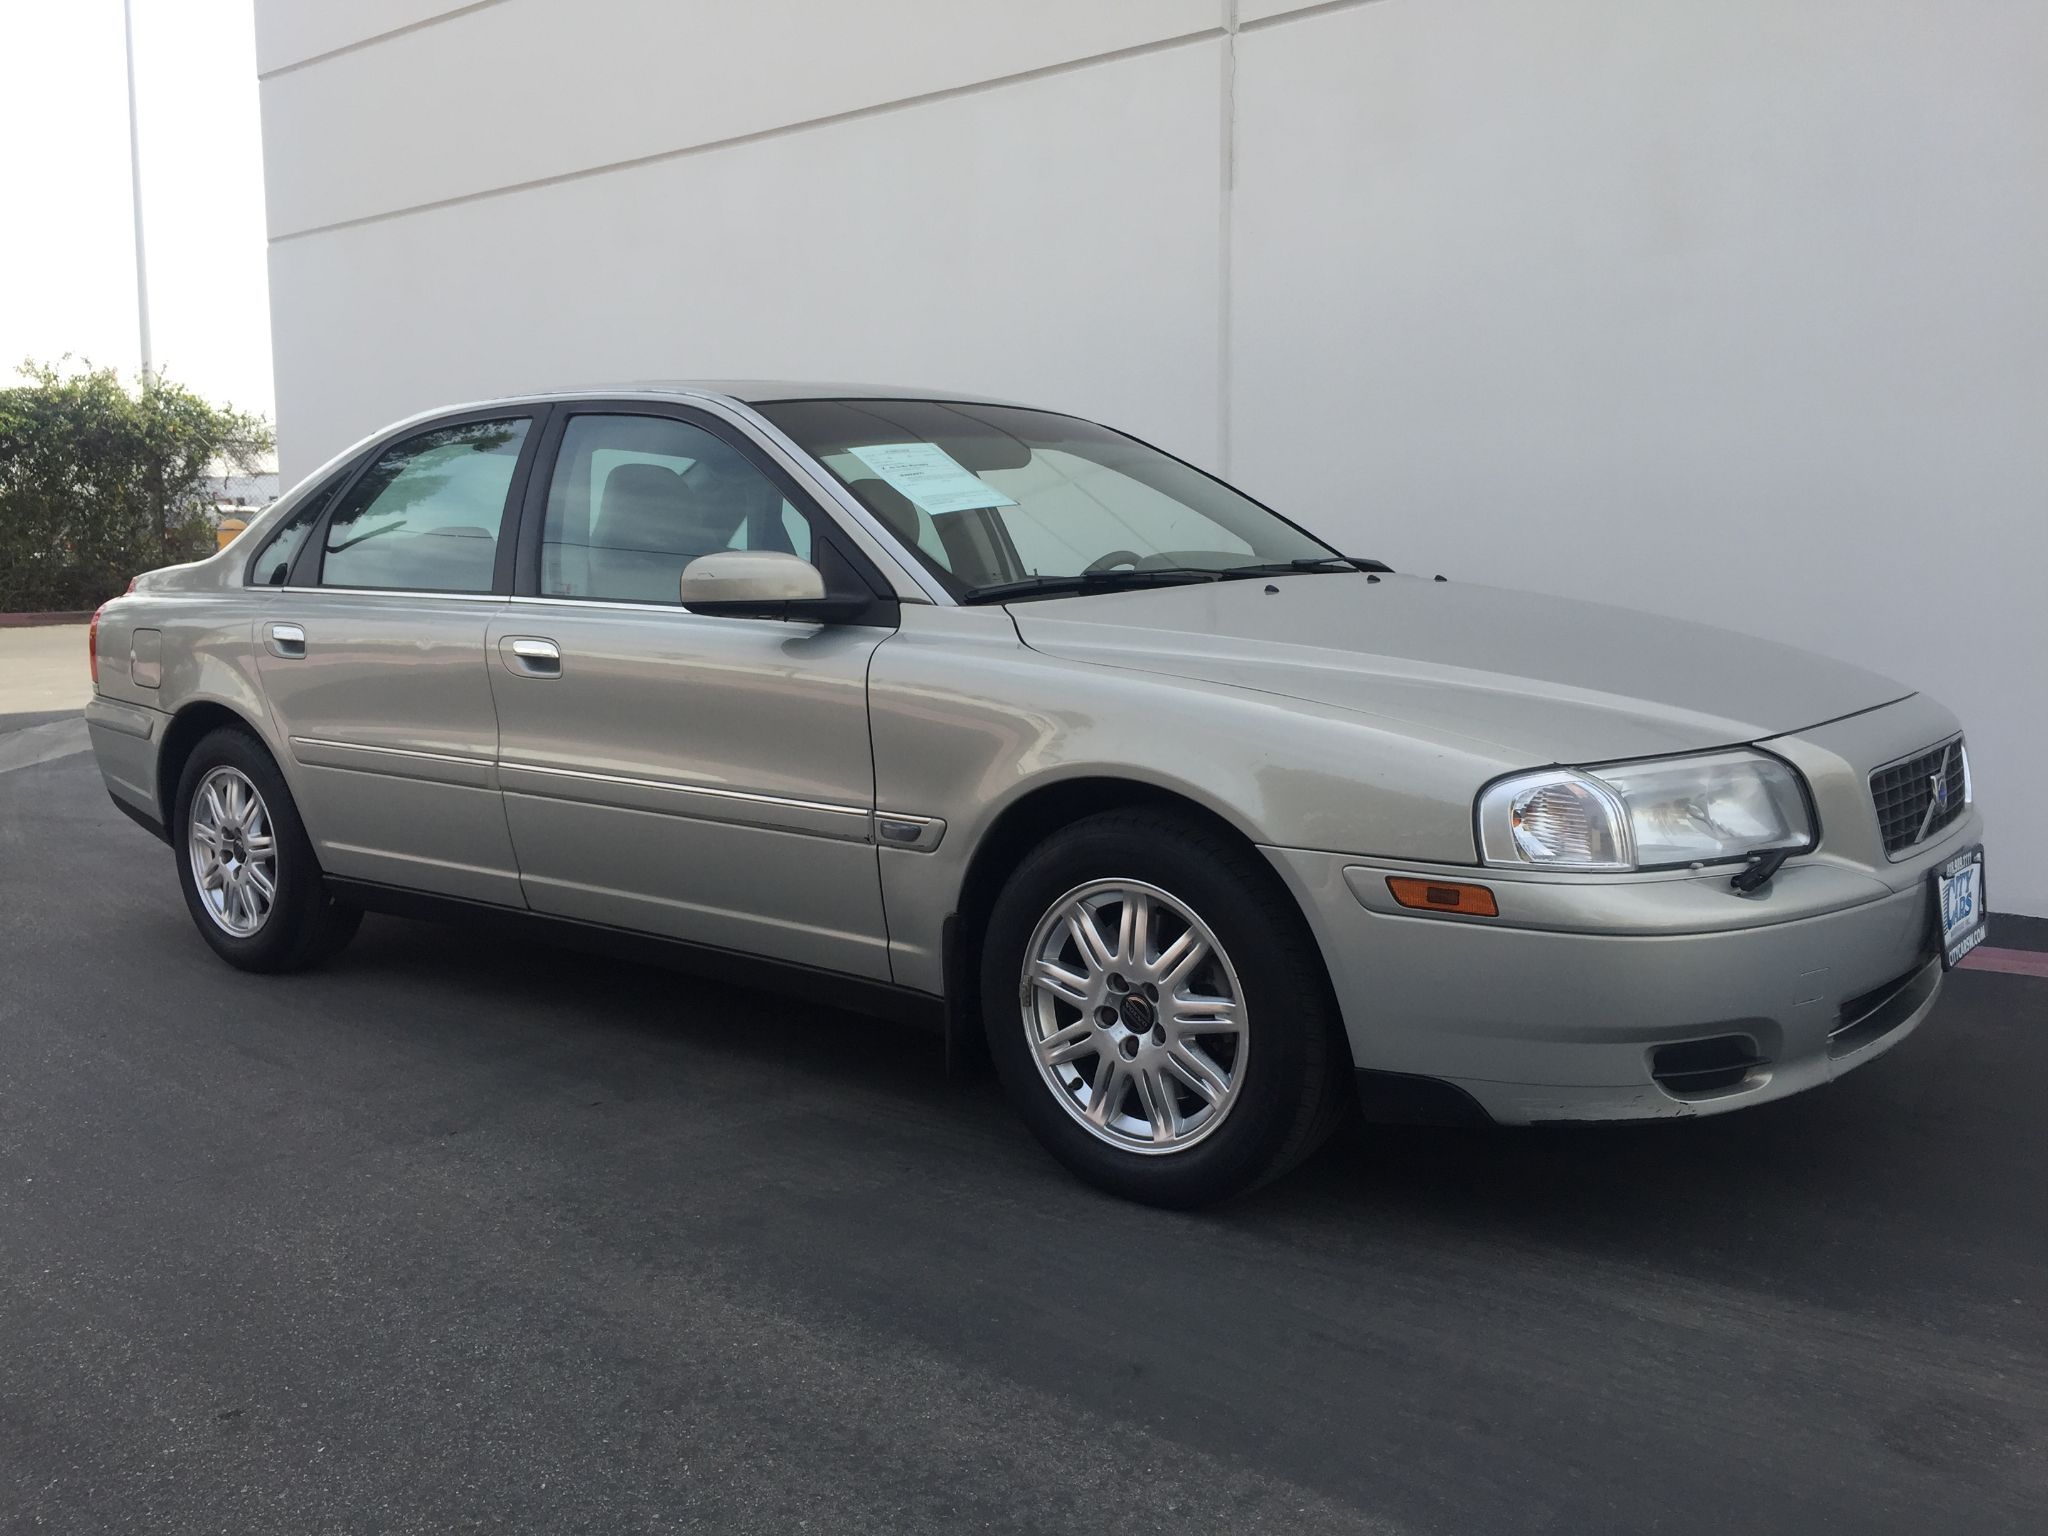 Used 2004 Volvo S80 at City Cars Warehouse INC